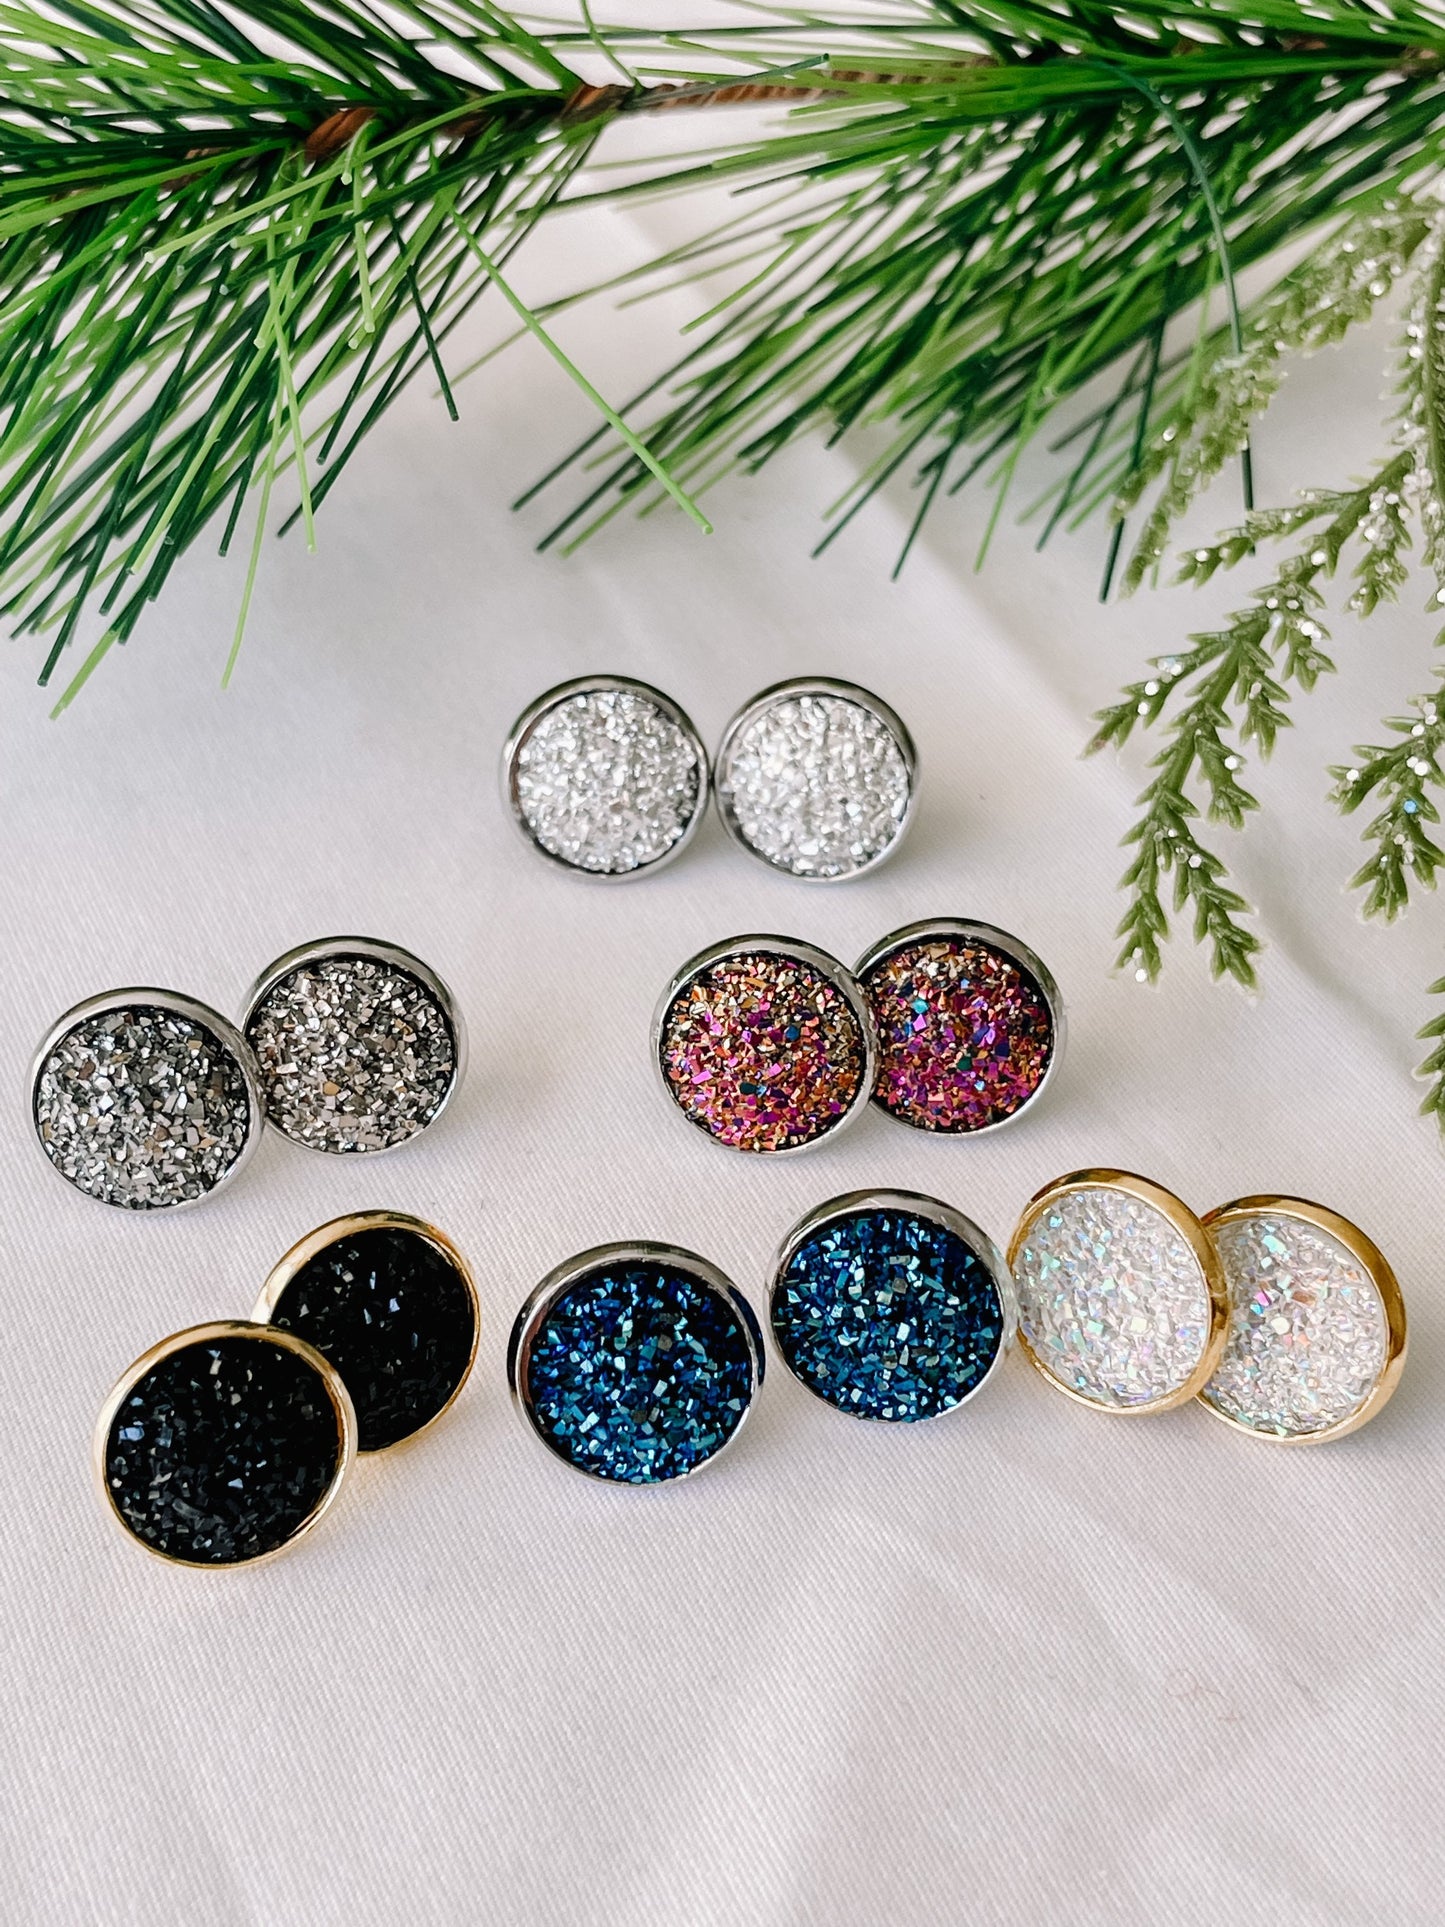 Sparkly stud earrings, sparkly studs, druzy studs